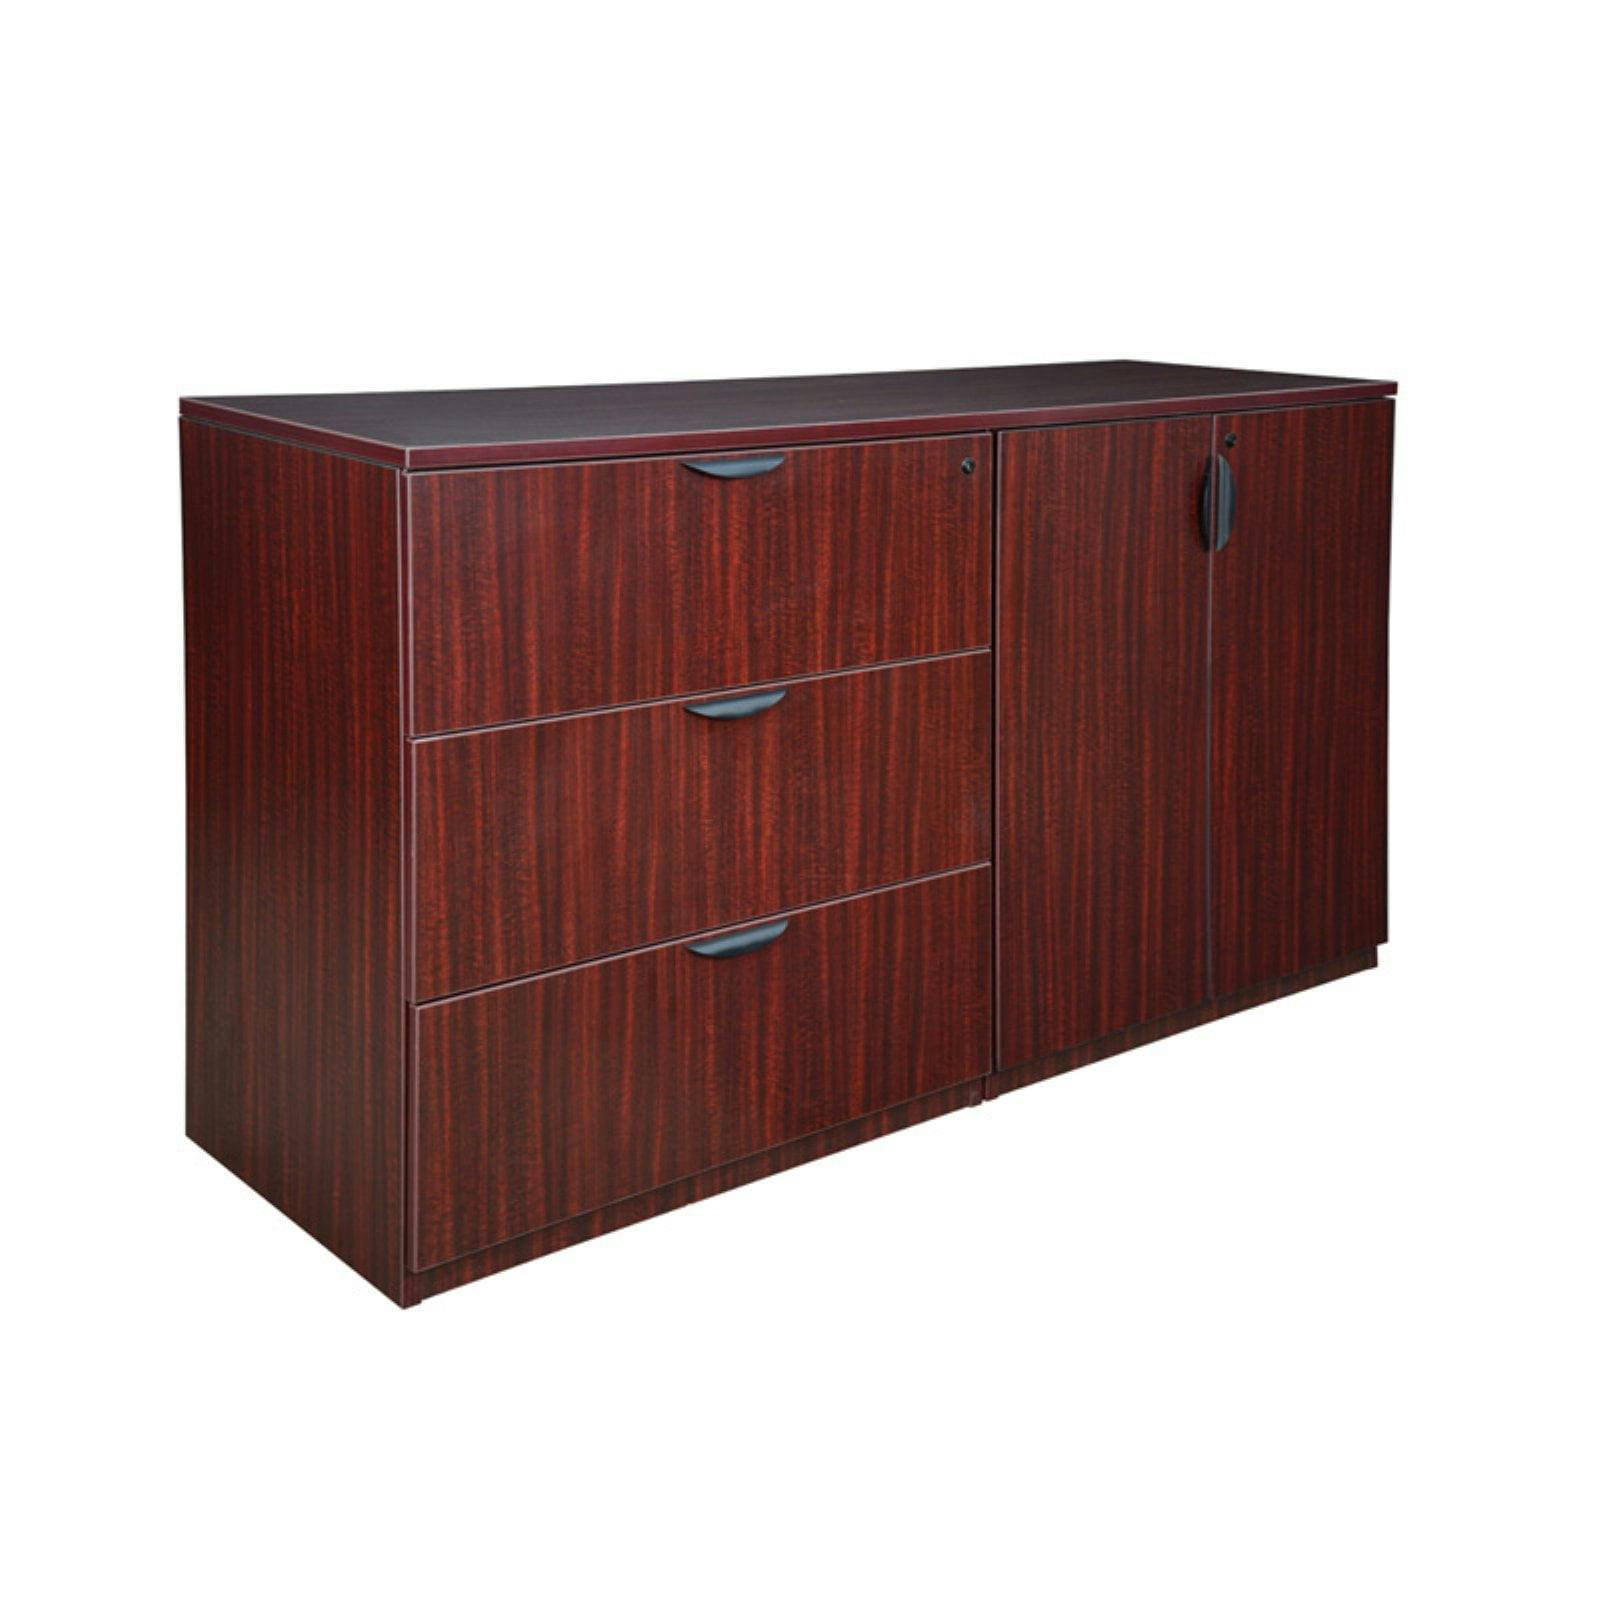 Legacy 72" Mahogany Lateral File Cabinet with Adjustable Shelves